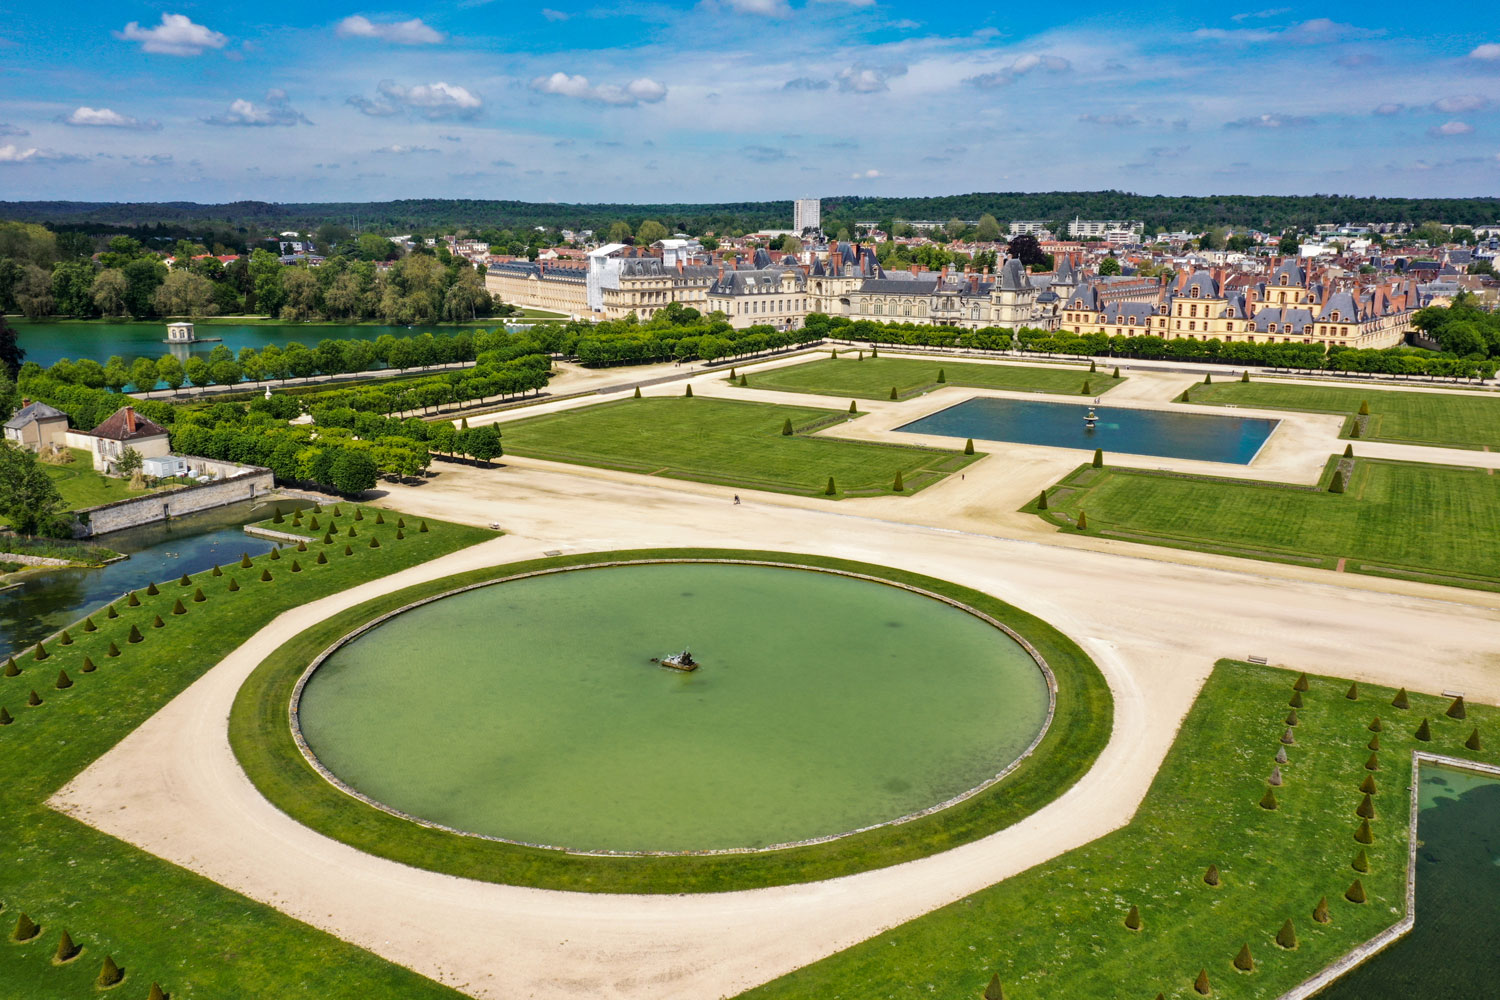 Aerial view of Chateau de Fontainebleau with its gardens, a UNESCO